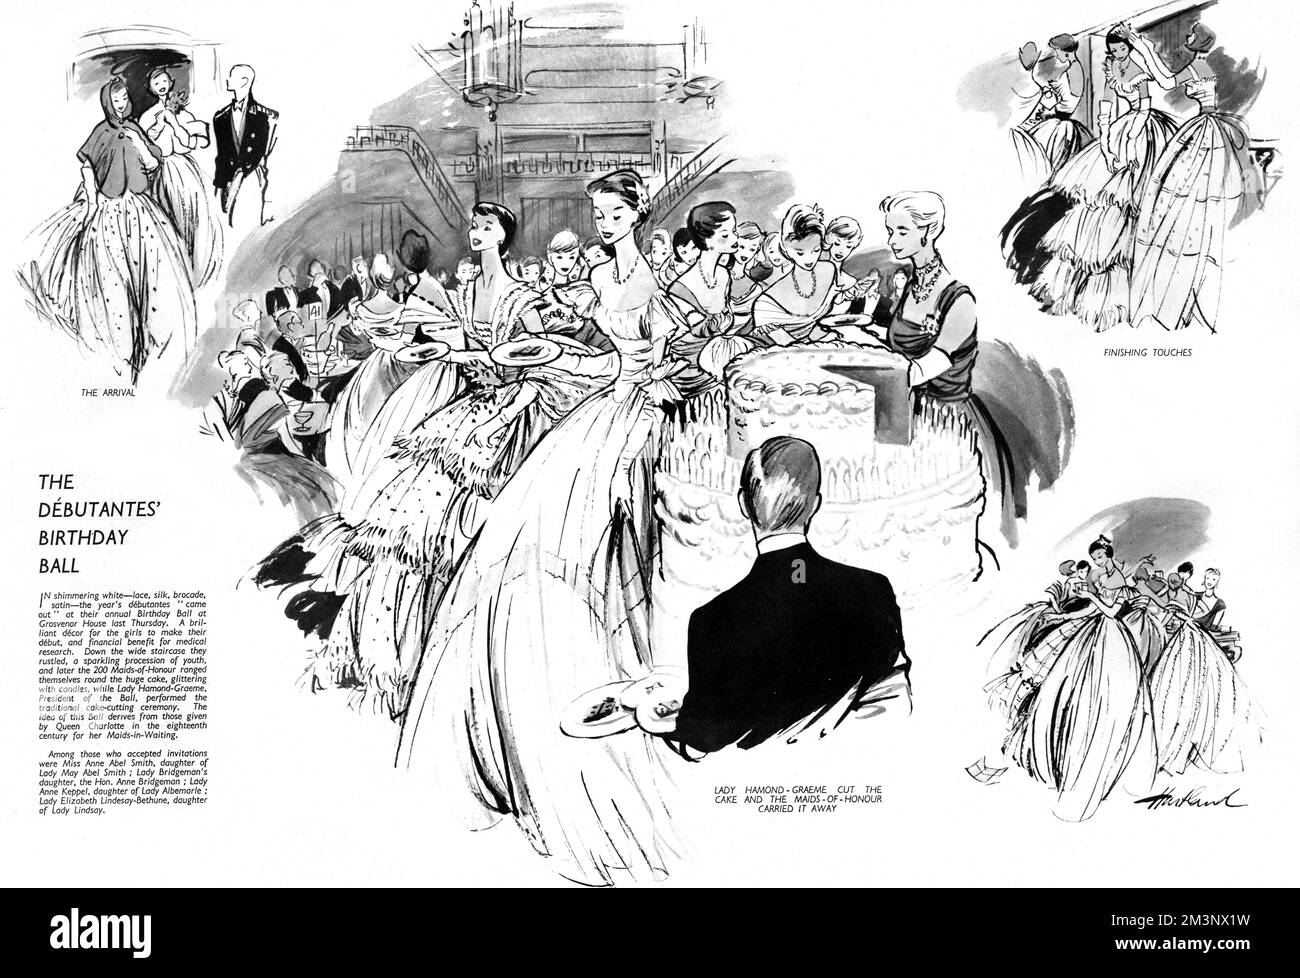 Scenes at Grosvenor House for Queen Charlotte's Ball, the pinnacle of the Season for a debutante by the 1950s, showing the girls arriving in their white dresses, finishing touches in the ladies room and the traditional cake cutting ceremony, in this instance by the President of the Ball, Lady Hamond-Graeme, with the maids-of-honour, 200 in all, each taking a piece away.     Date: 1950 Stock Photo